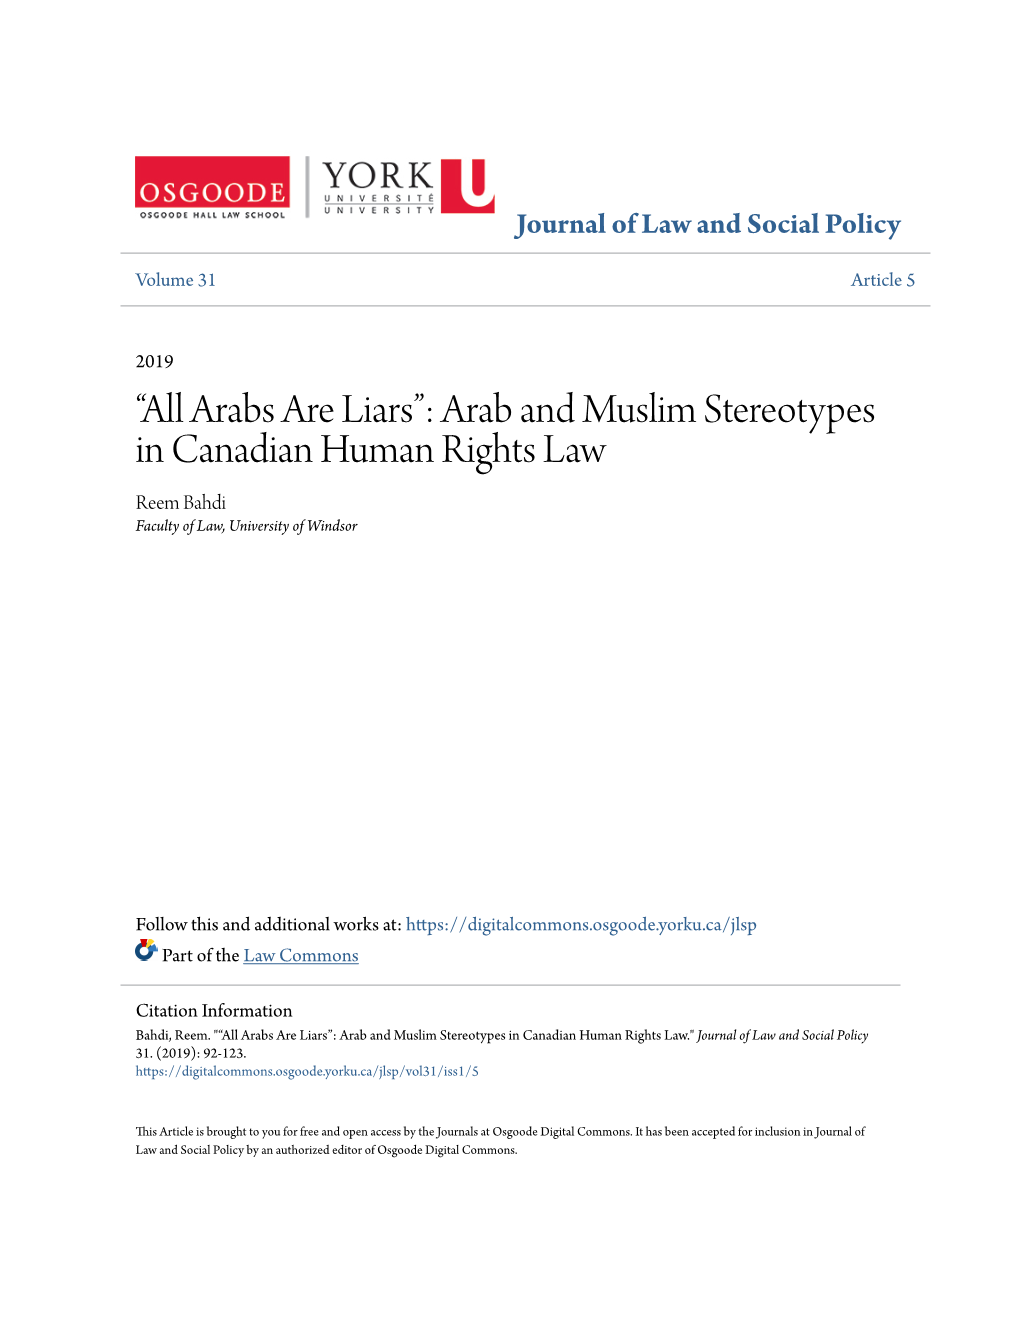 Arab and Muslim Stereotypes in Canadian Human Rights Law Reem Bahdi Faculty of Law, University of Windsor